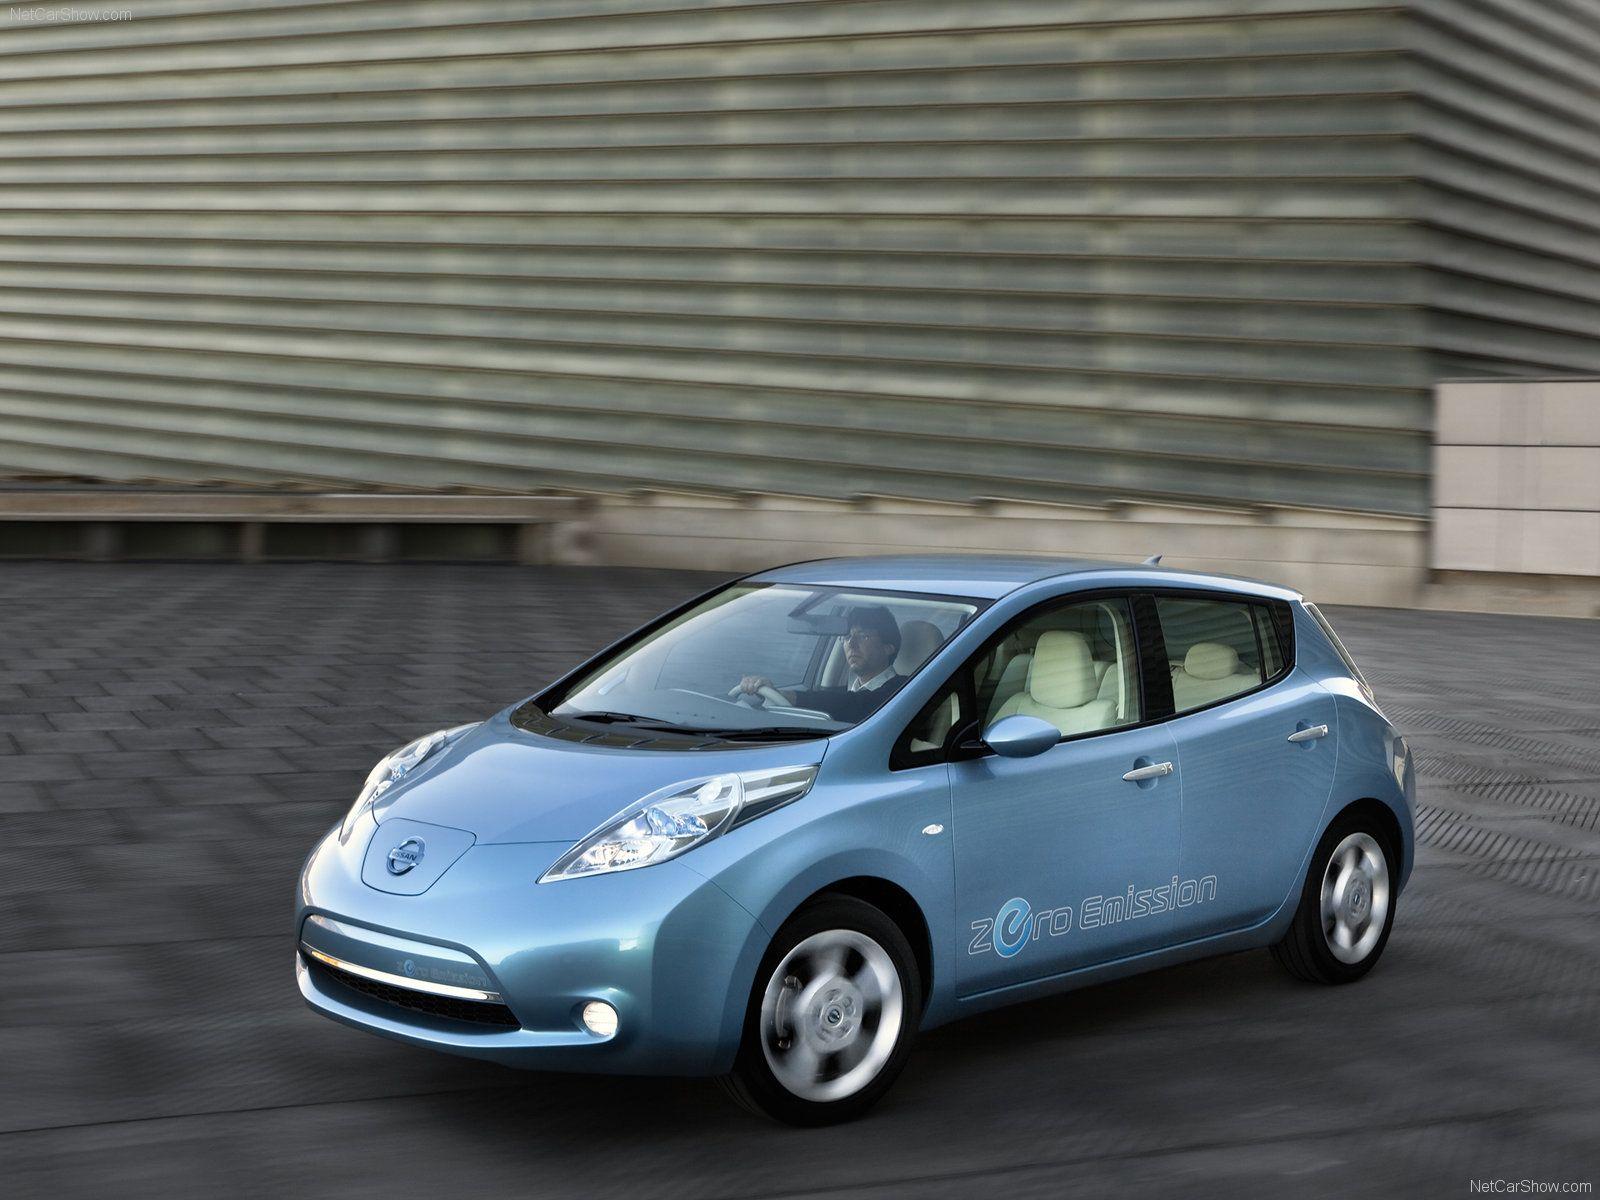 Nissan Leaf picture # 72061. Nissan photo gallery